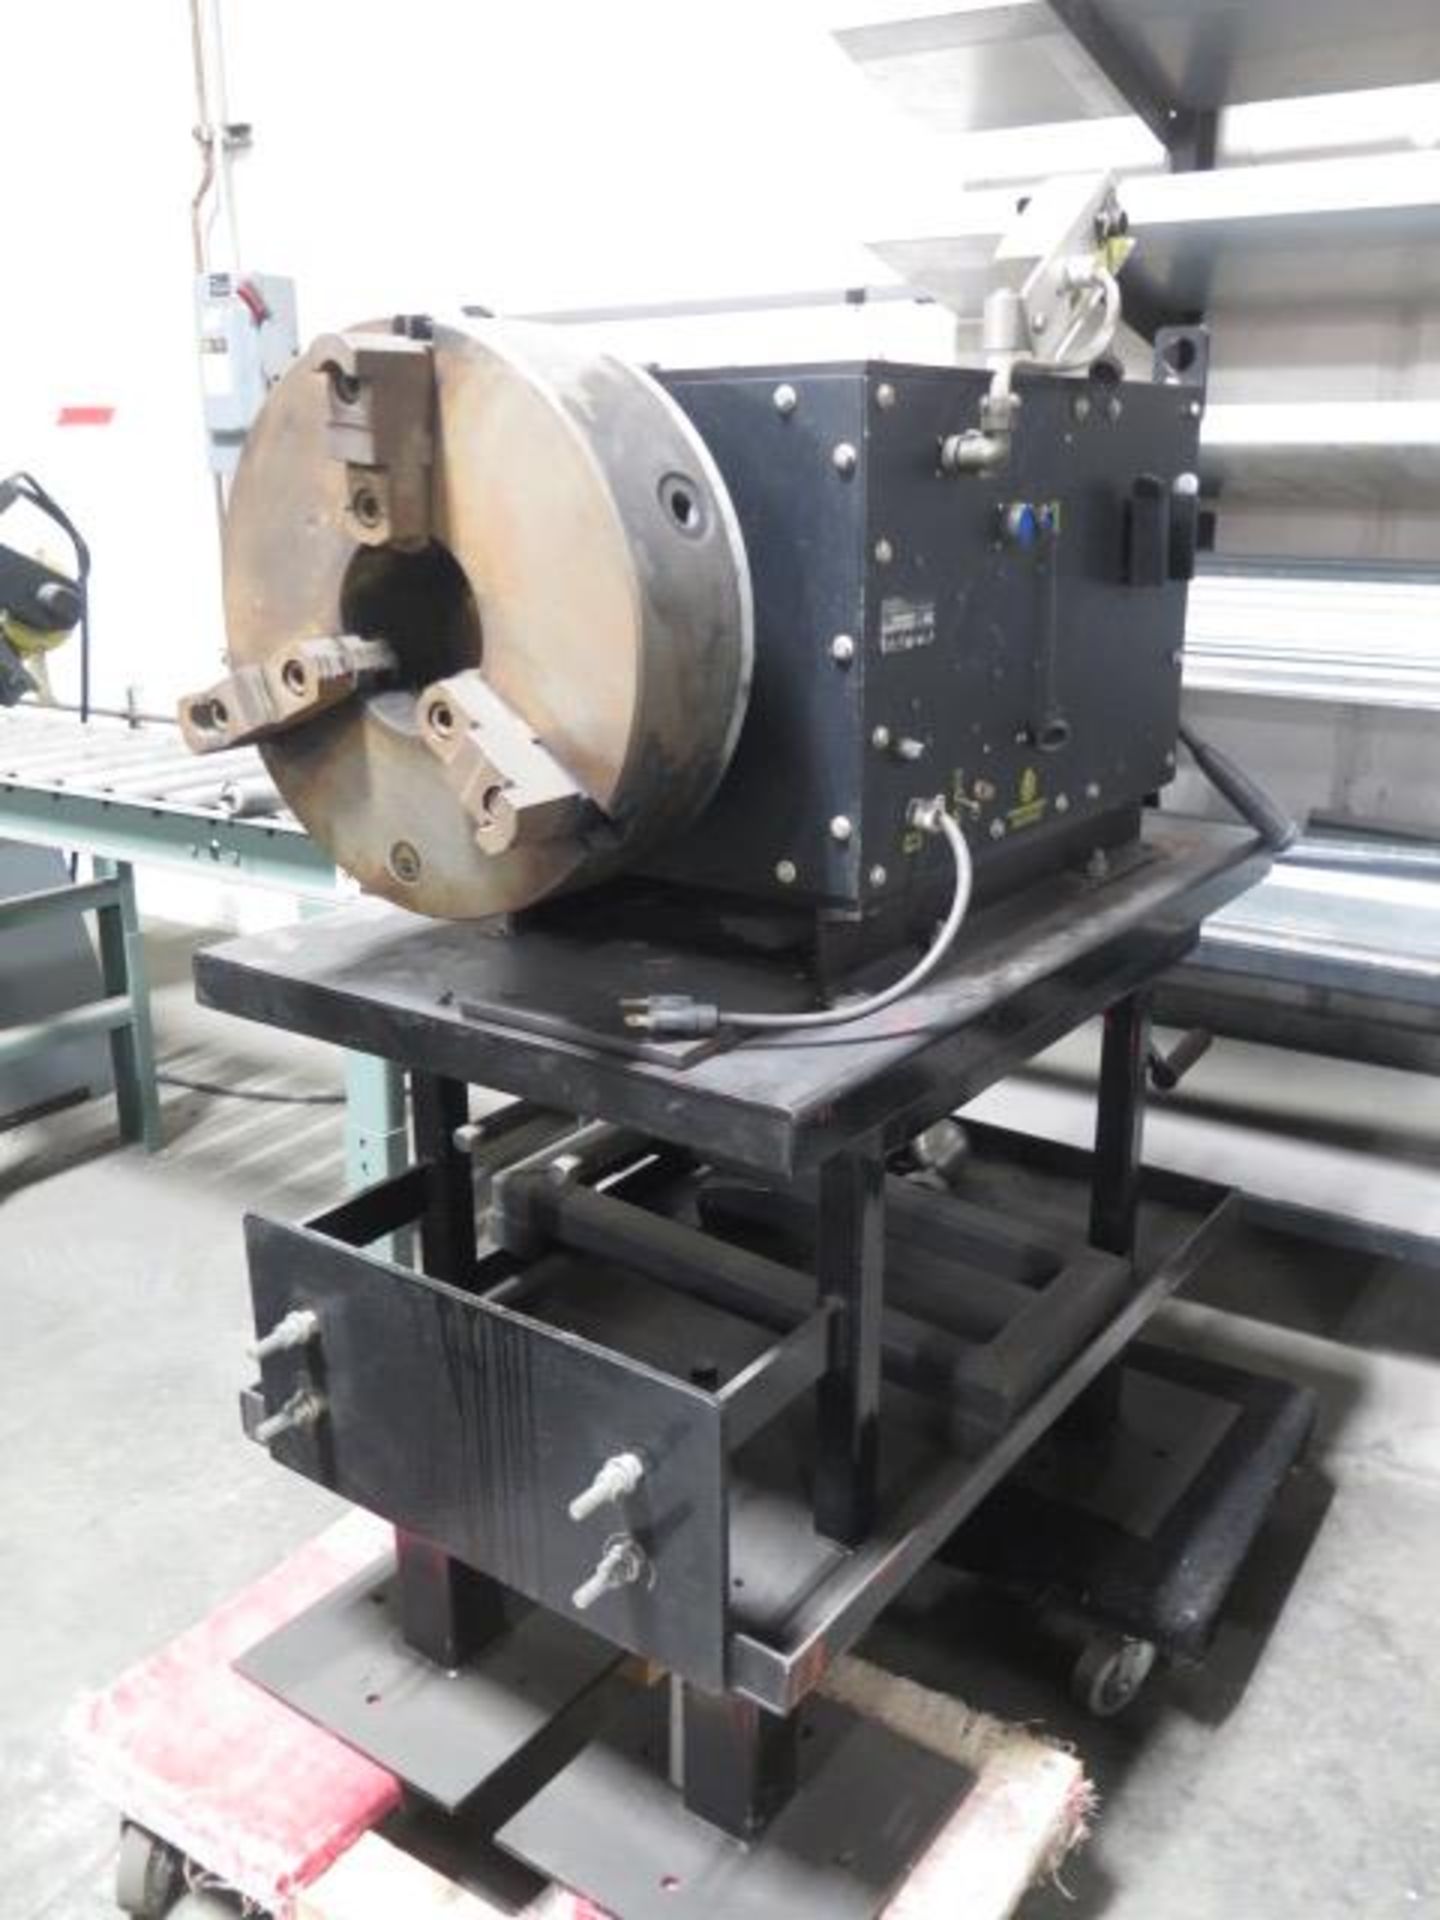 Cypress Pipe Cutting Line w/ Bug-O Syst mdl. SEO-4450 Weld Positioner w 16" 3-Jaw Chuck, SOLD AS IS